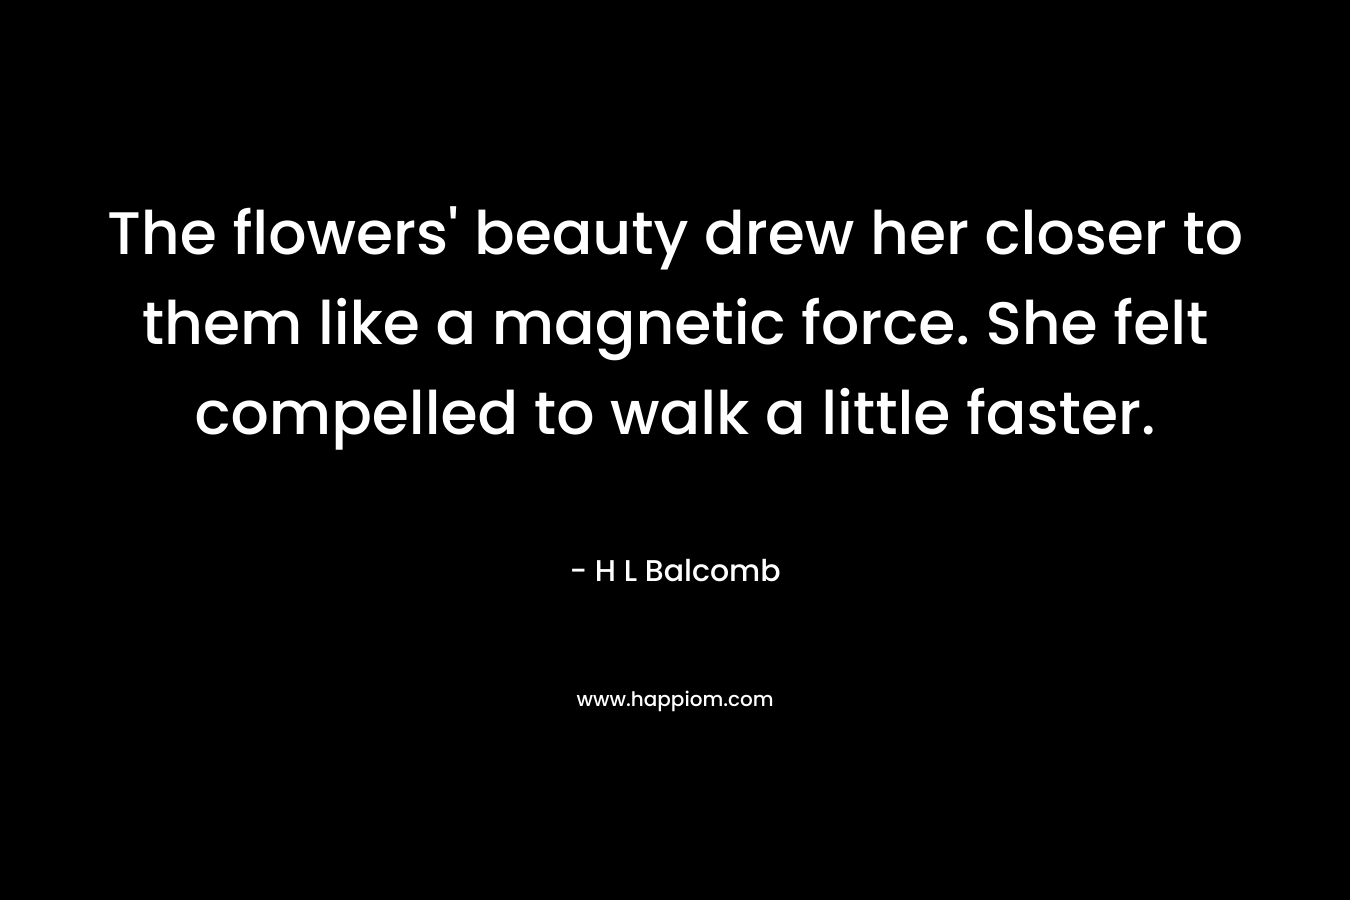 The flowers’ beauty drew her closer to them like a magnetic force. She felt compelled to walk a little faster. – H L Balcomb